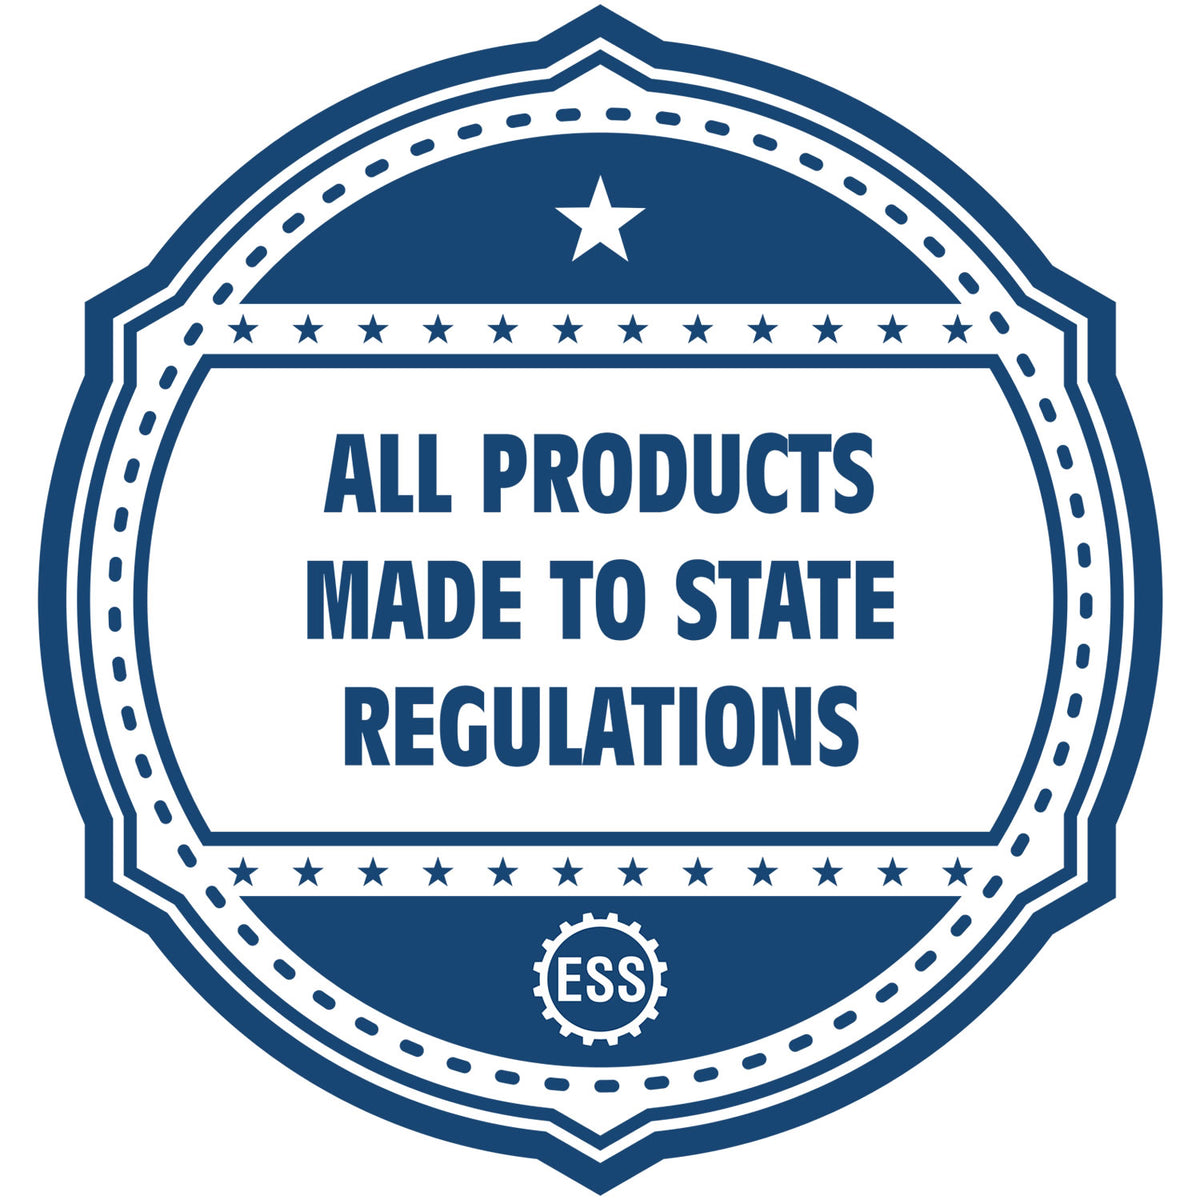 An icon or badge element for the State of Maryland Long Reach Architectural Embossing Seal showing that this product is made in compliance with state regulations.